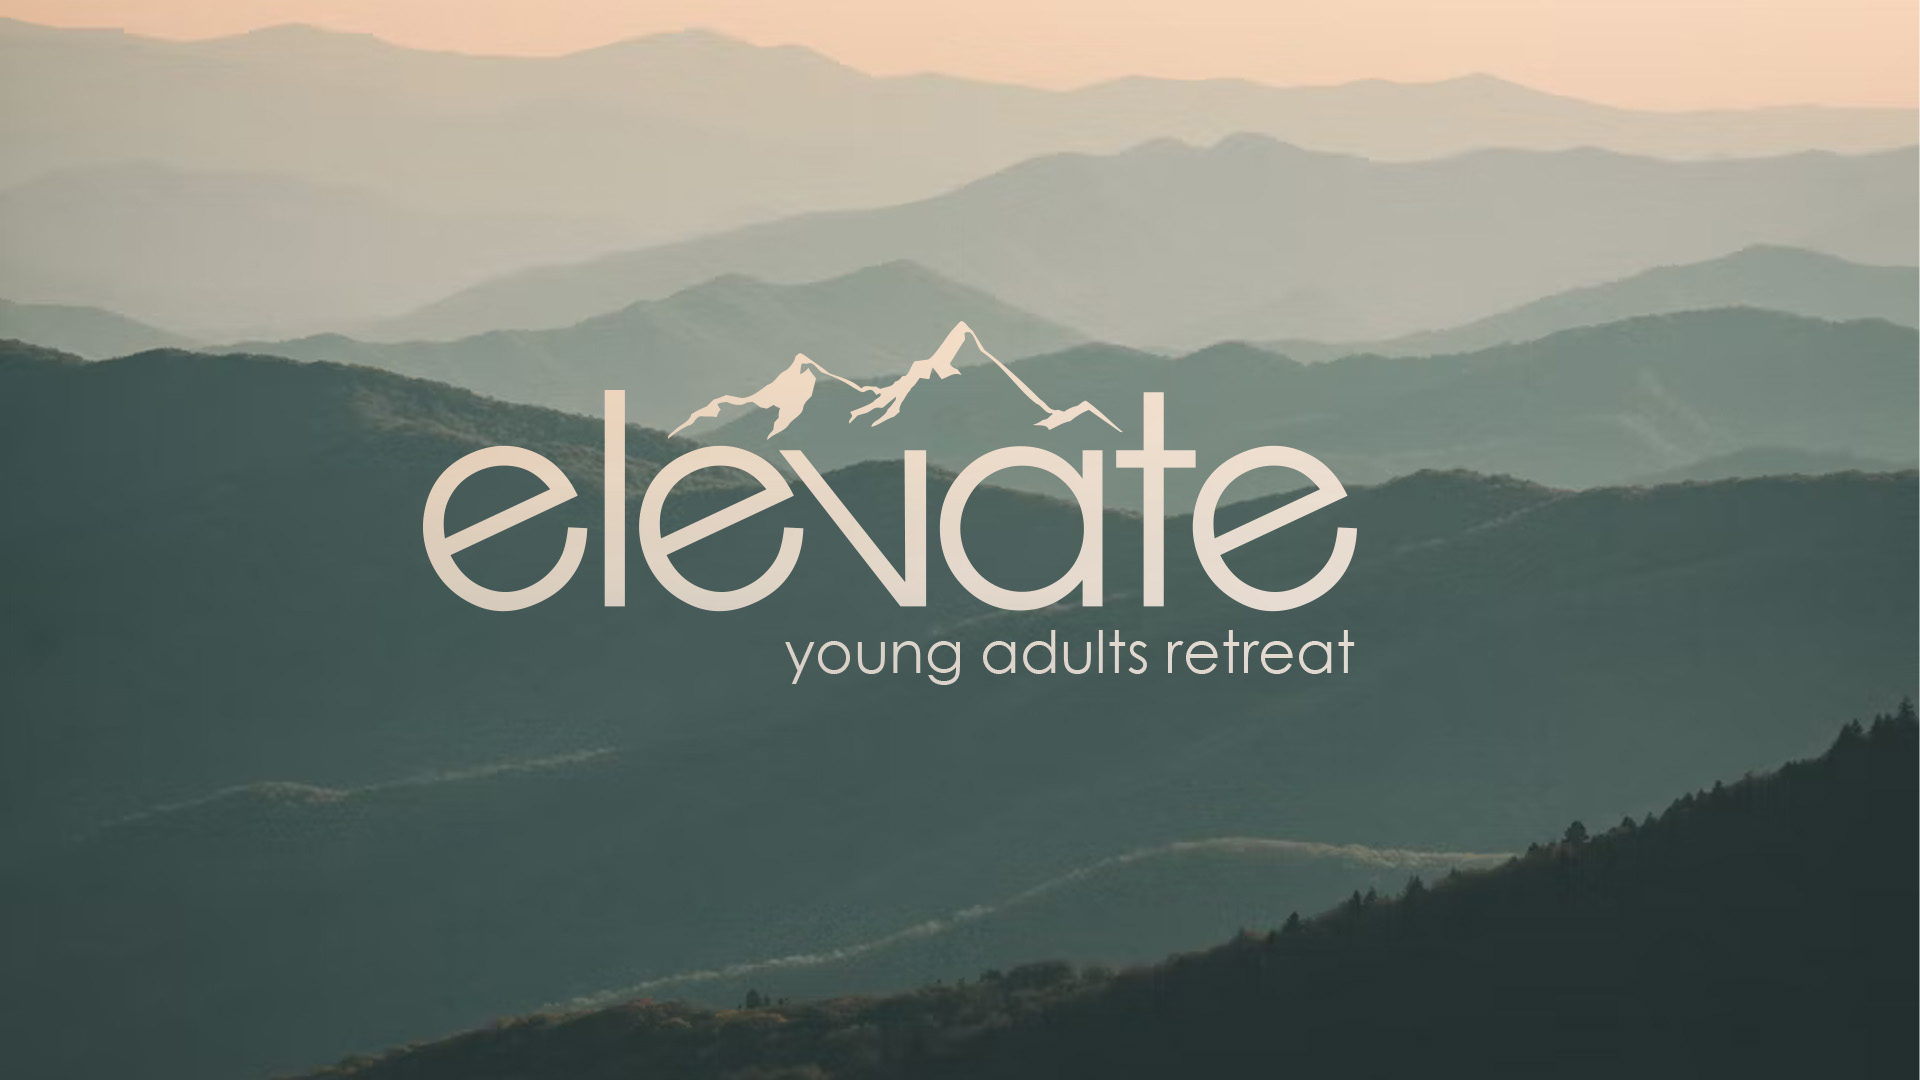 ELEVATE
Young Adults Retreat

June 3-5
YMCA of the Rockies
